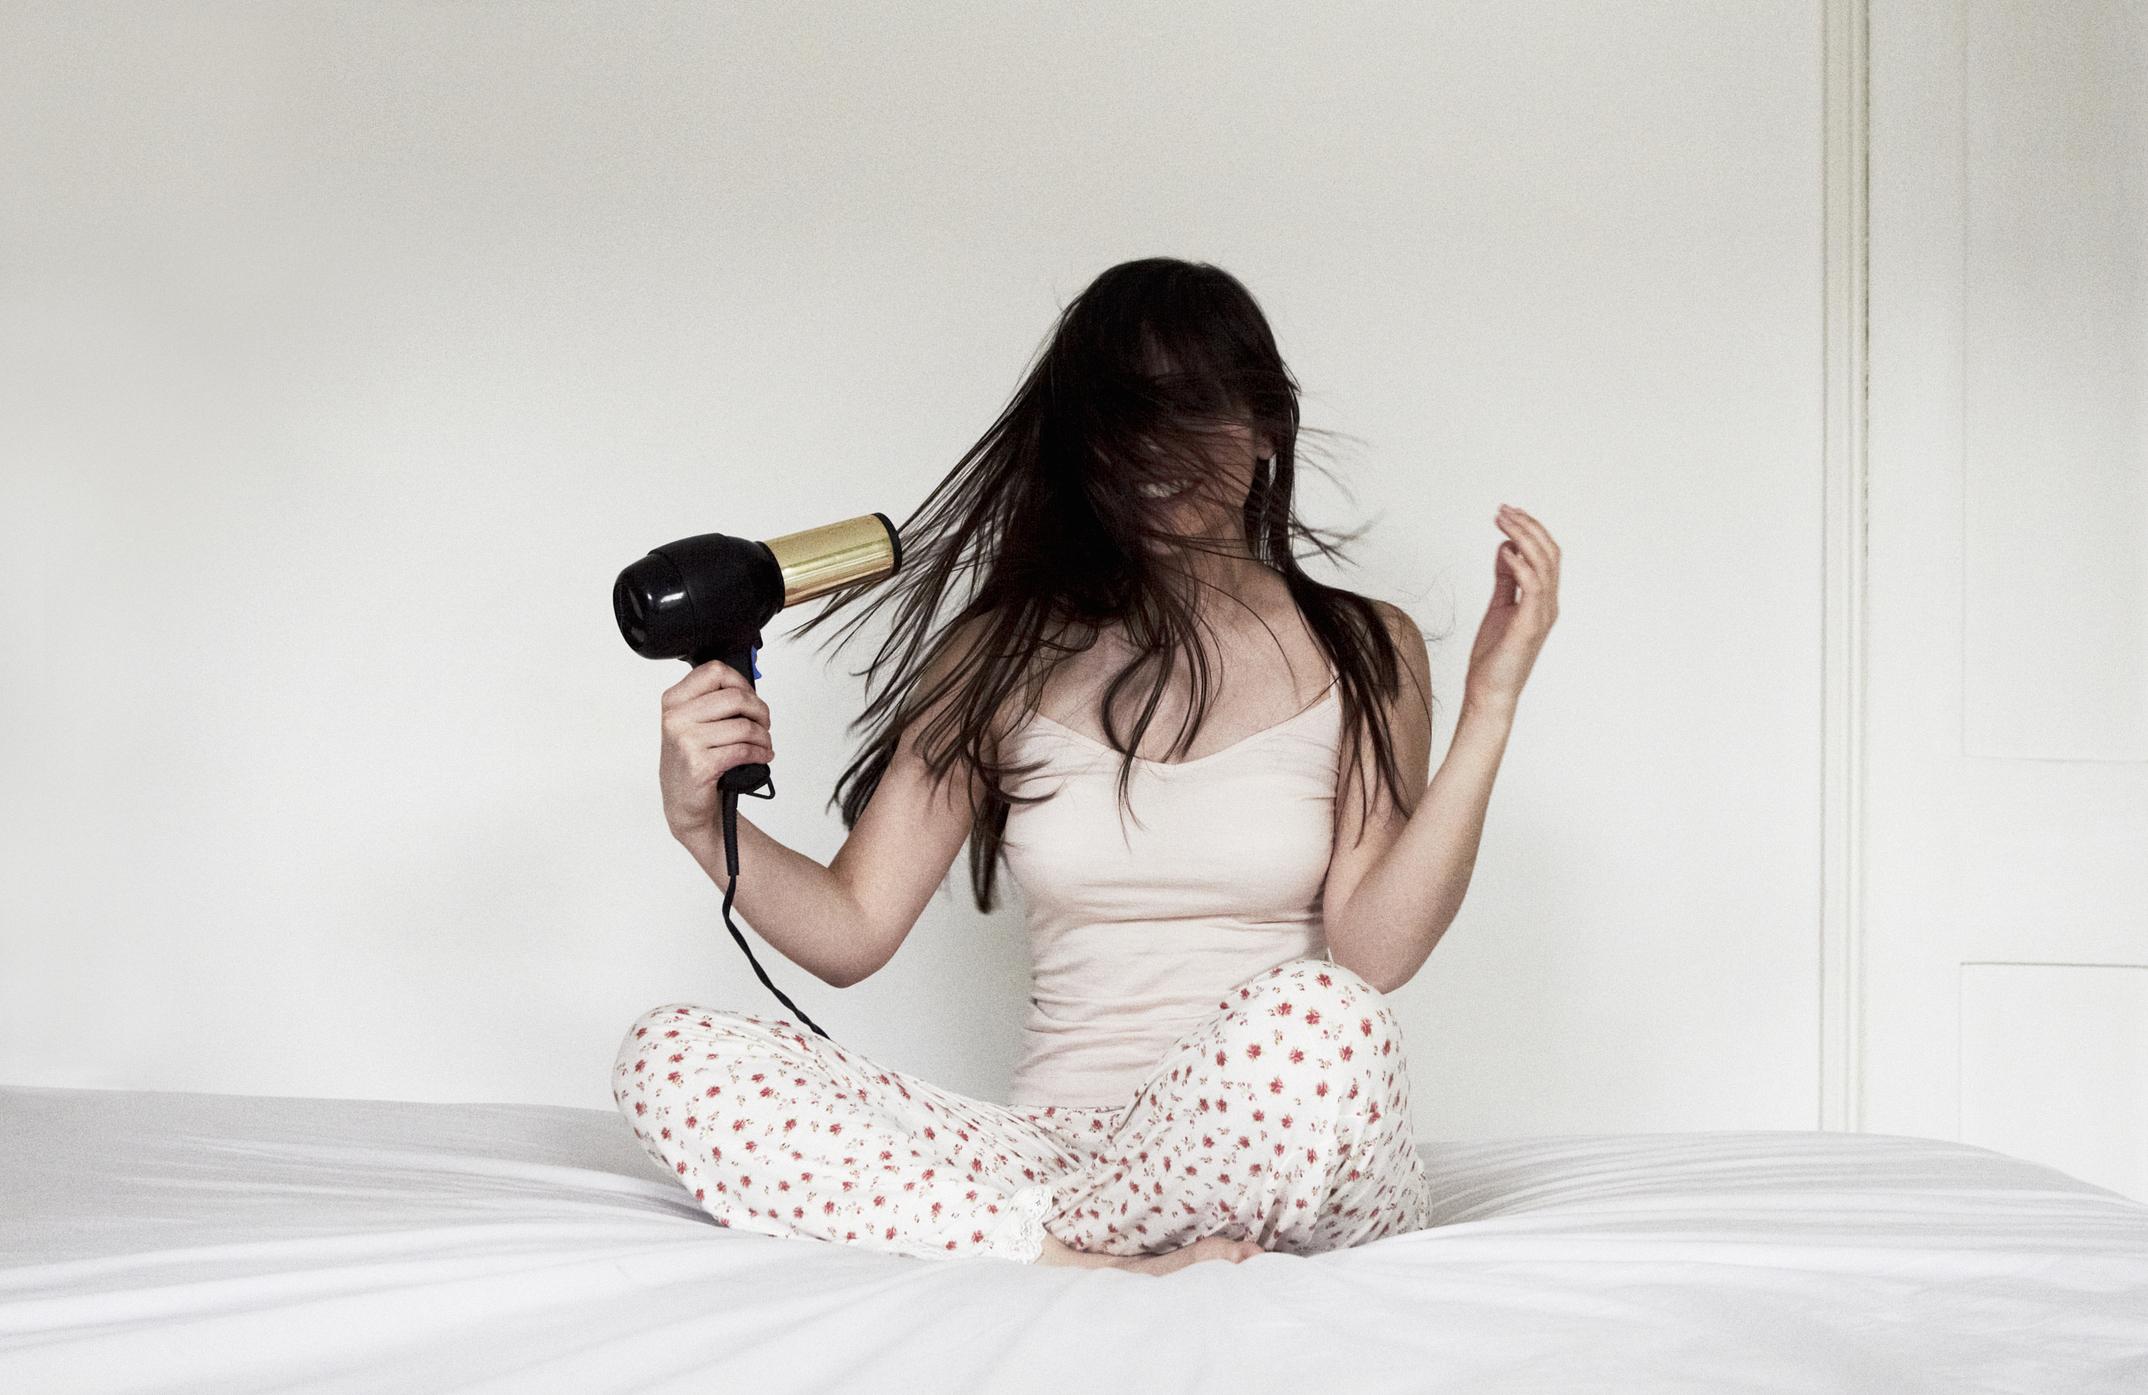  A woman sitting on a bed blow drying her long hair. 